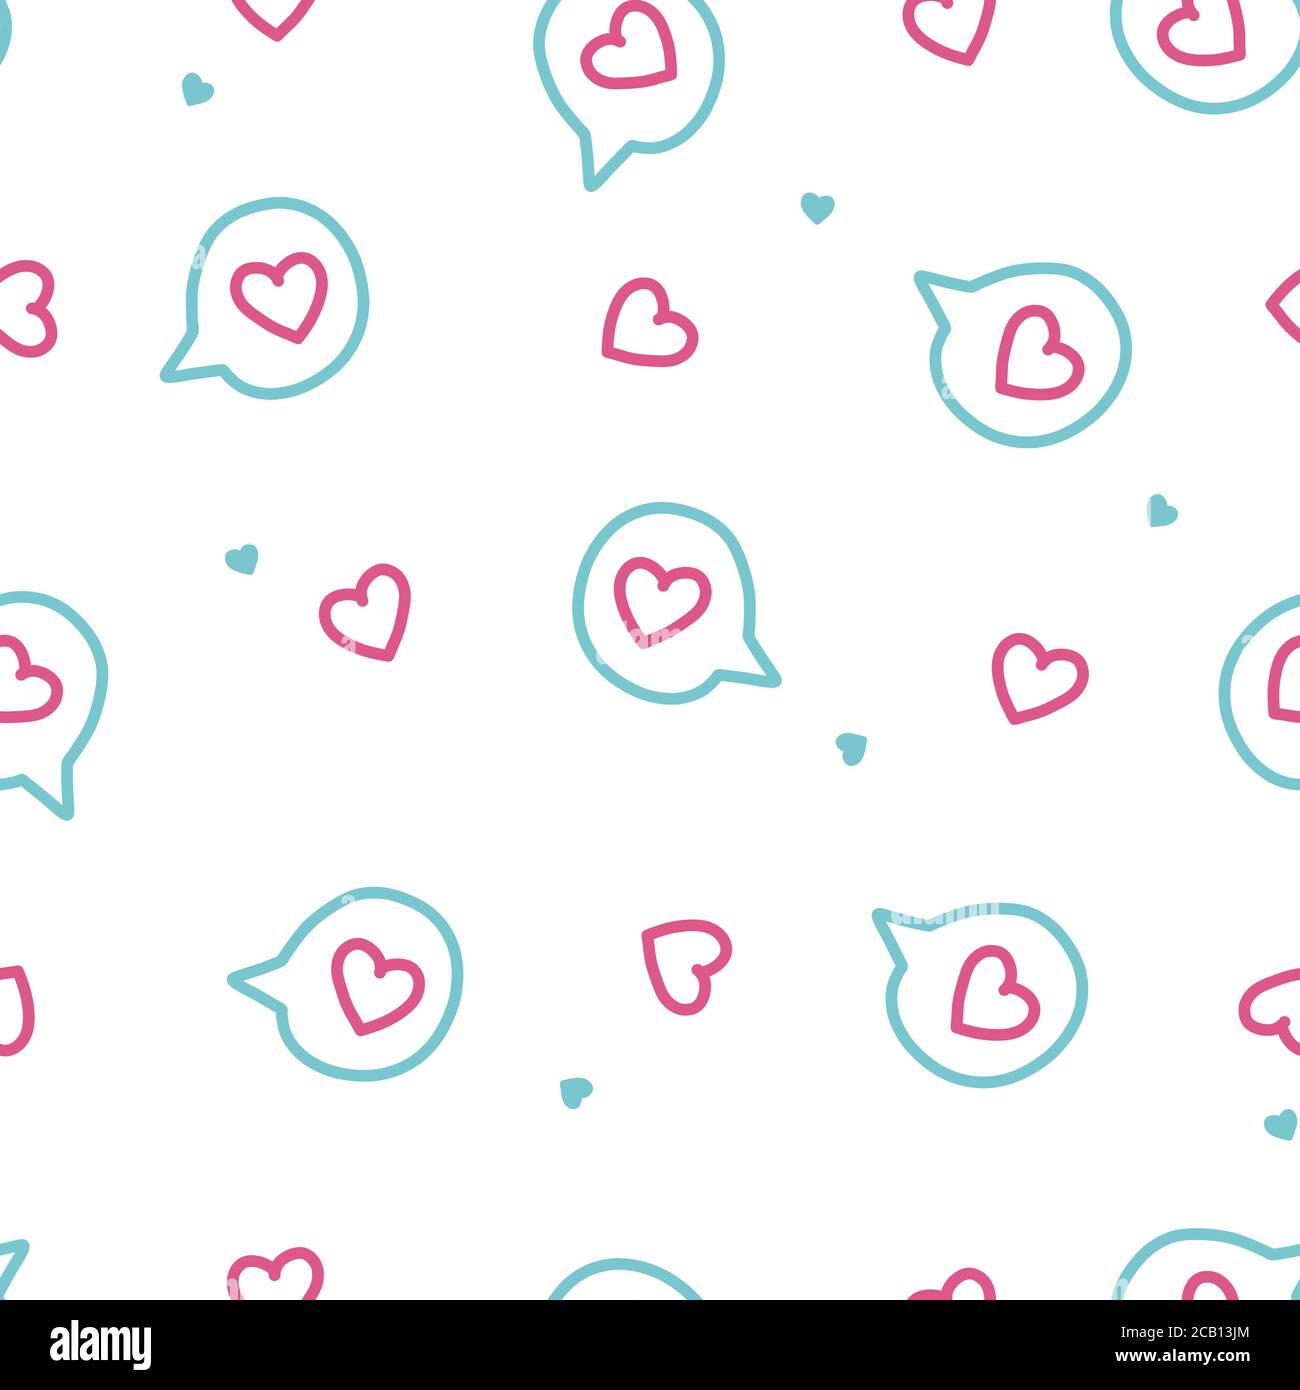 Seamless pattern with hearts and speaking bubbles. Doodle for backgrounds and seamless prints in white background. Stock Vector